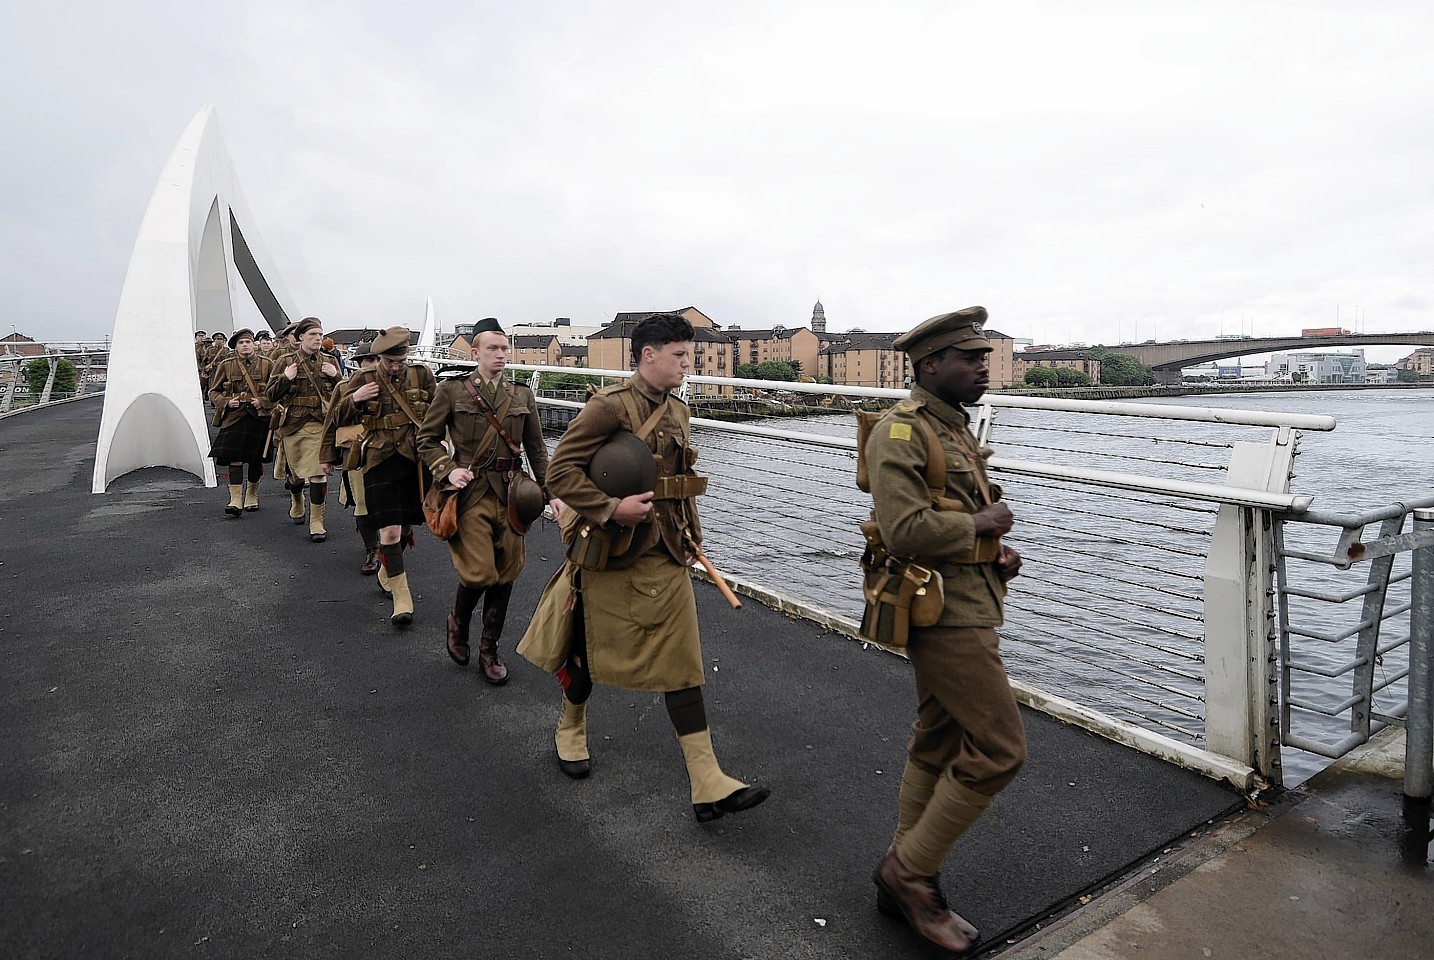 People dressed as soldiers as part of a mysterious tribute to mark the centenary of the Battle of the Somme that has popped up in Glasgow.